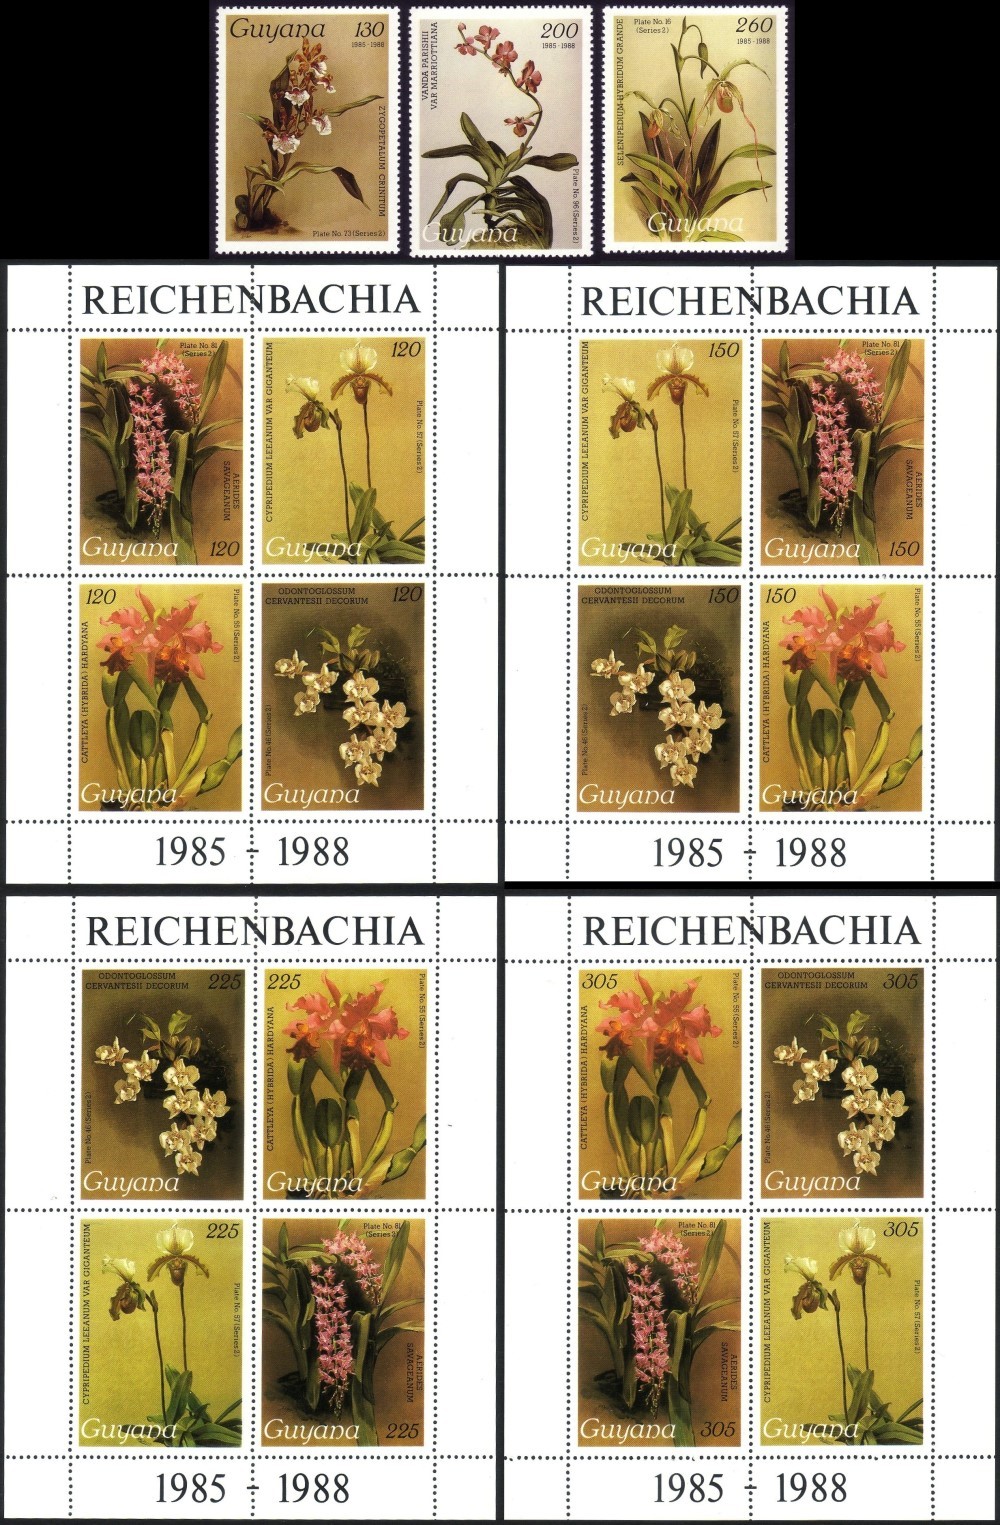 1988 Centenary of Publication of Sanders' Reichenbachia Orchids (32nd issue) Stamps